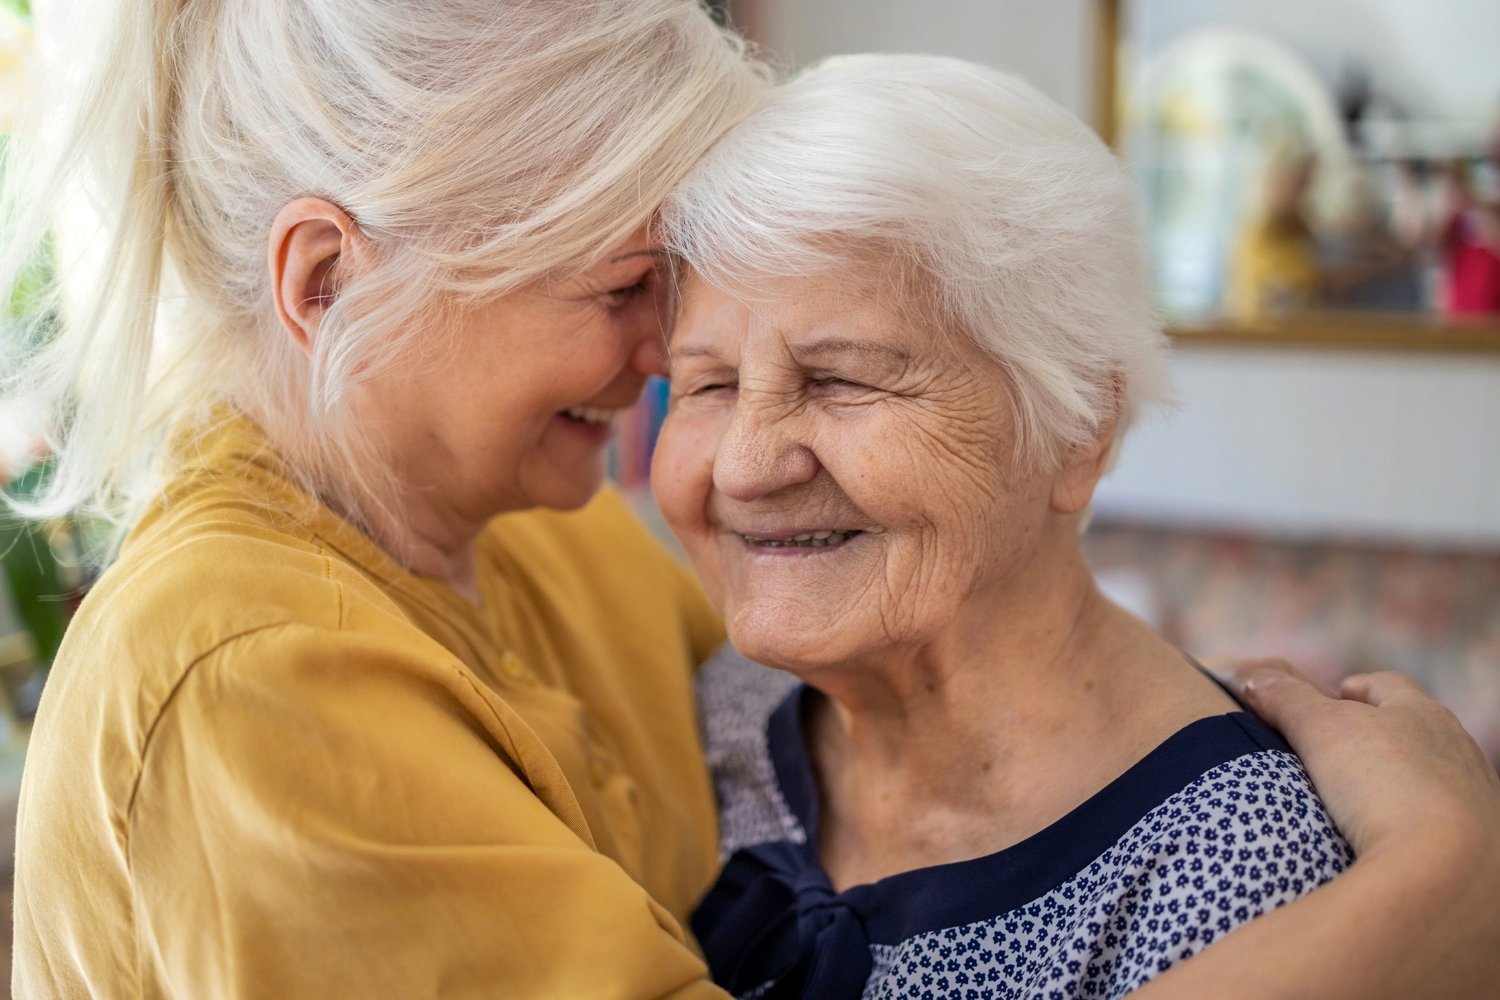 A senior woman smiling as she is embraced by another younger woman